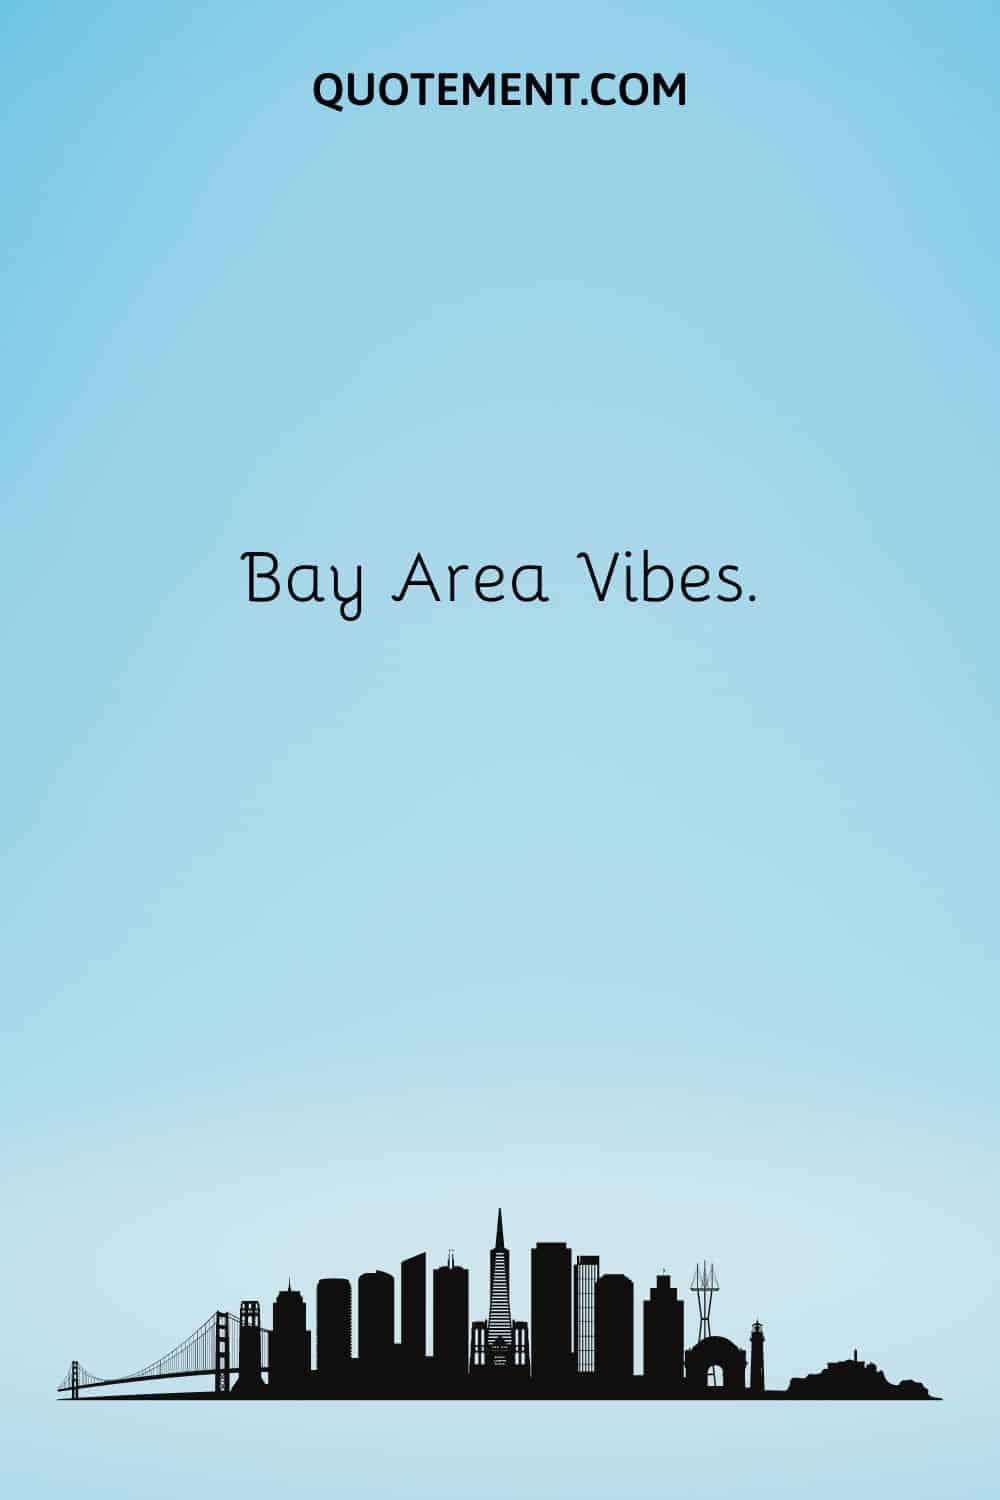 Bay Area Vibes.